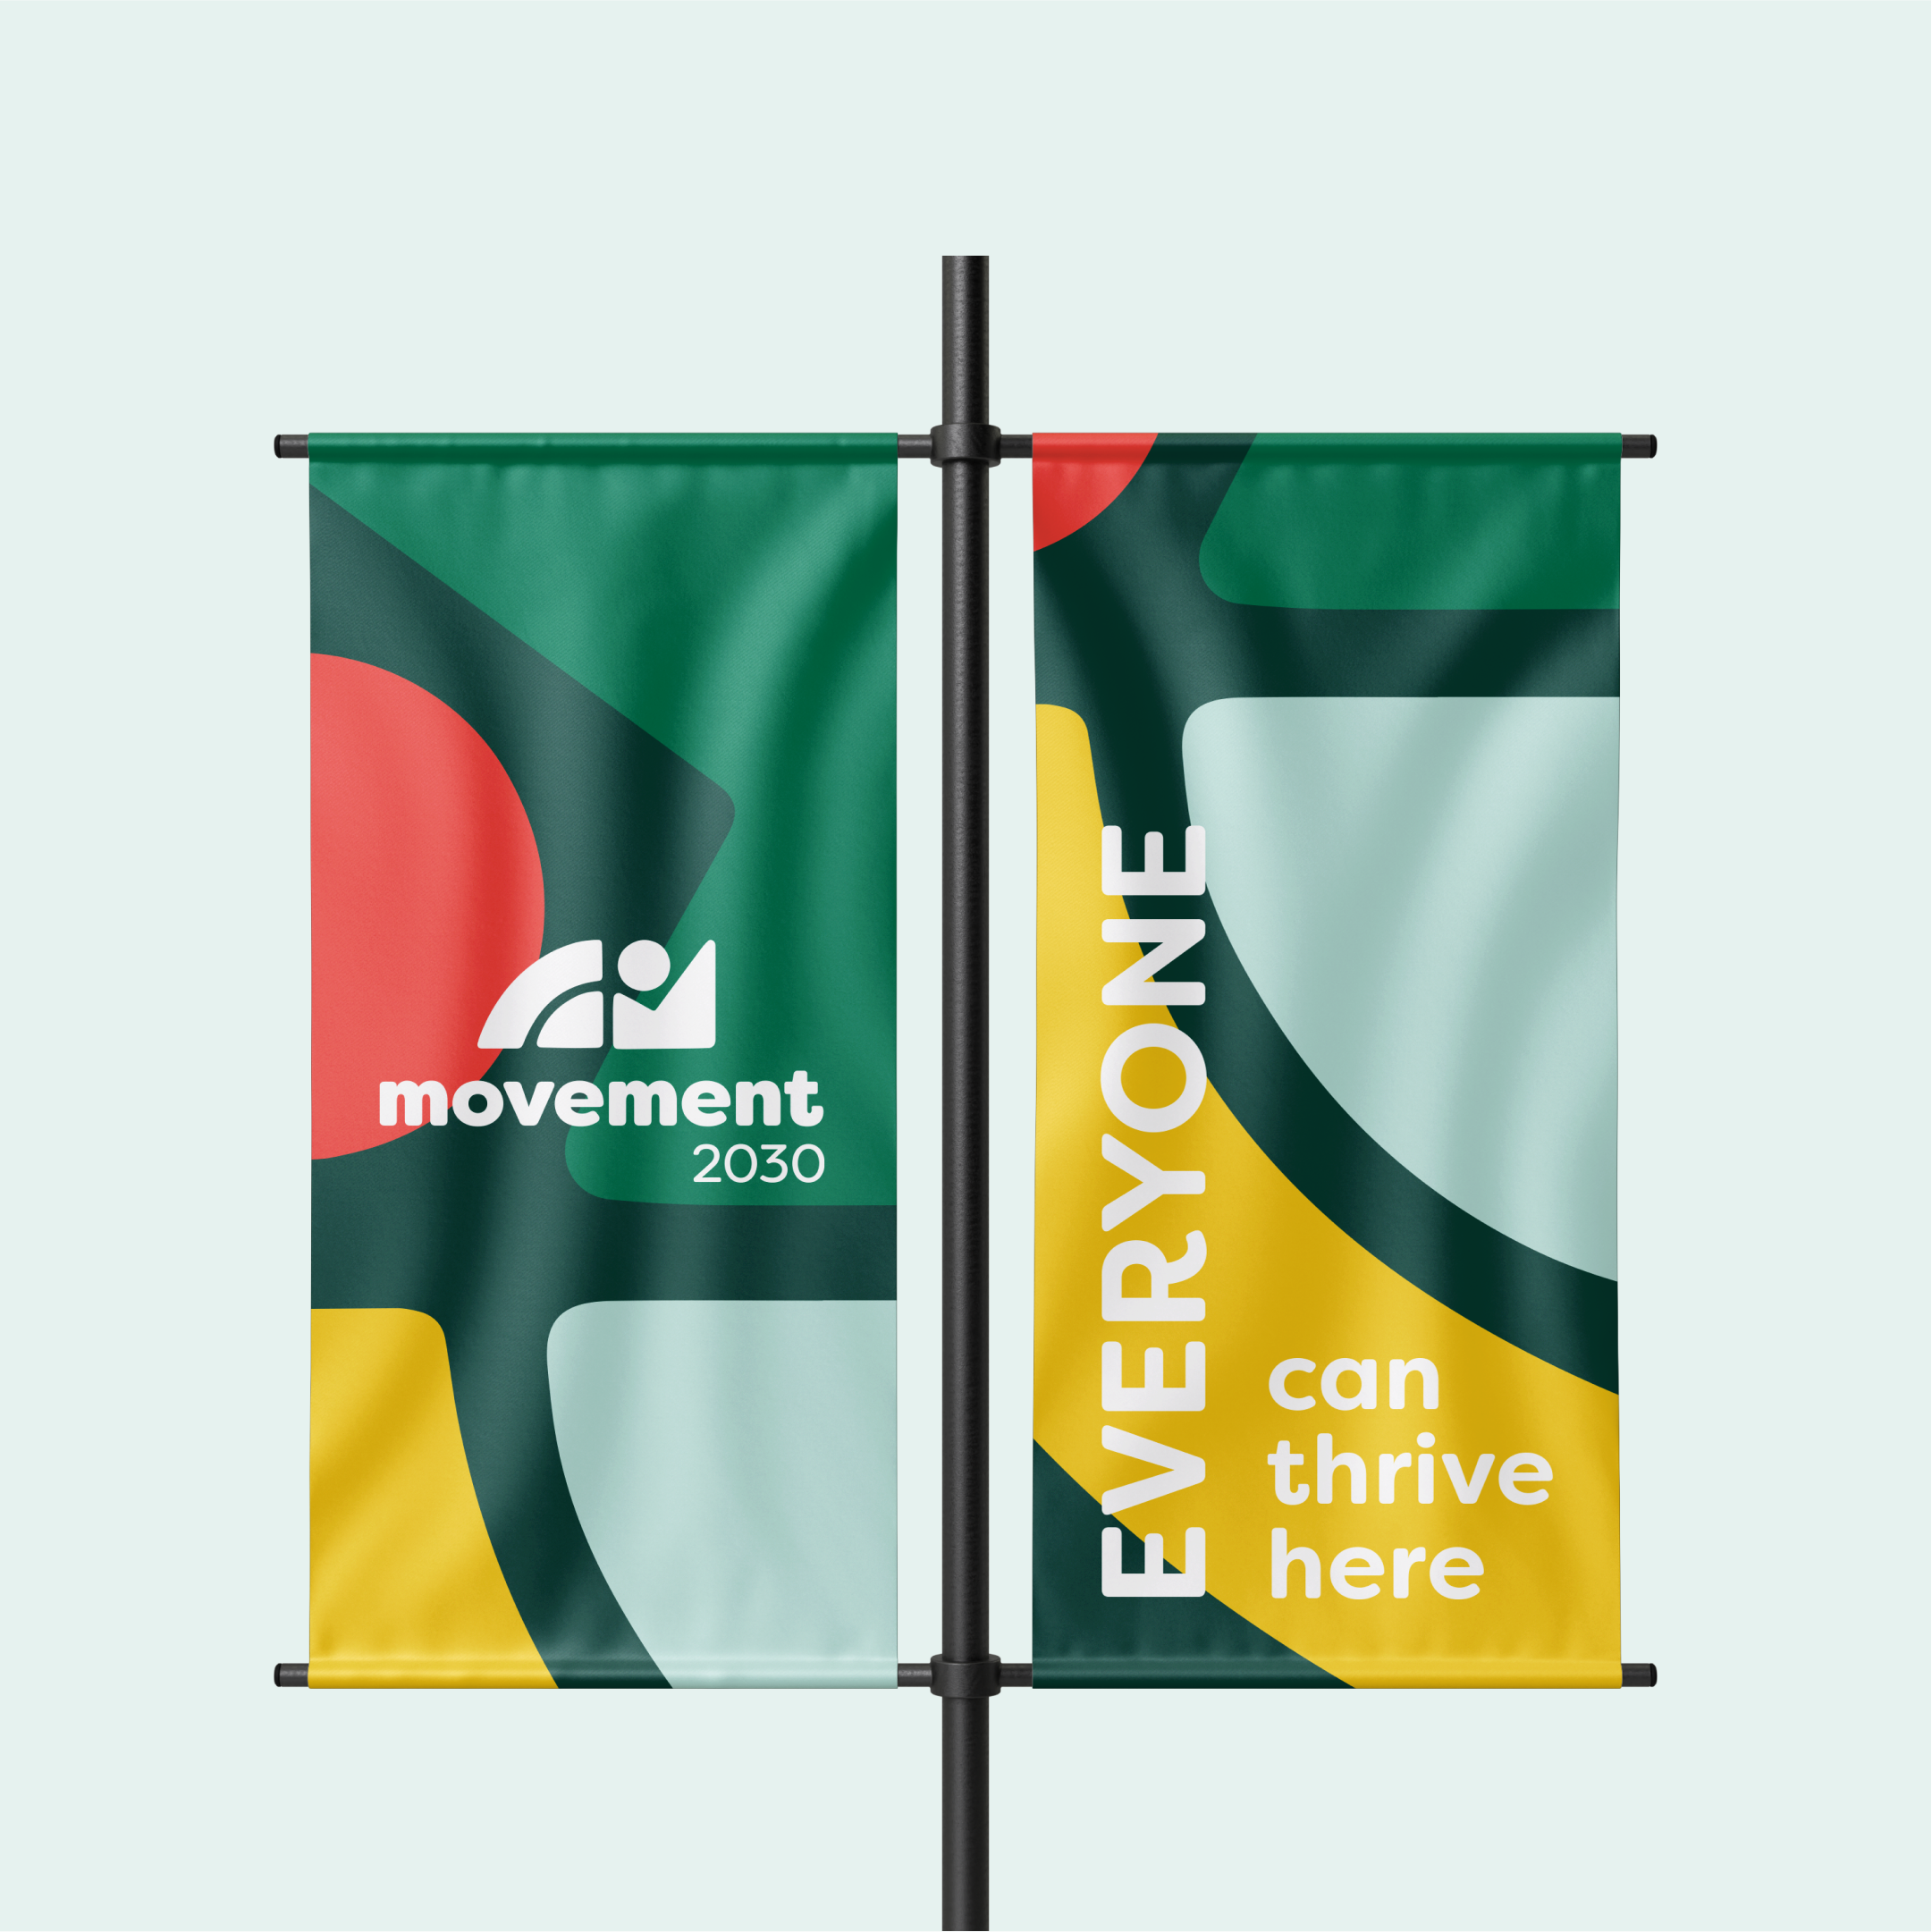 Movement 2030 Flags and Enamel Pin